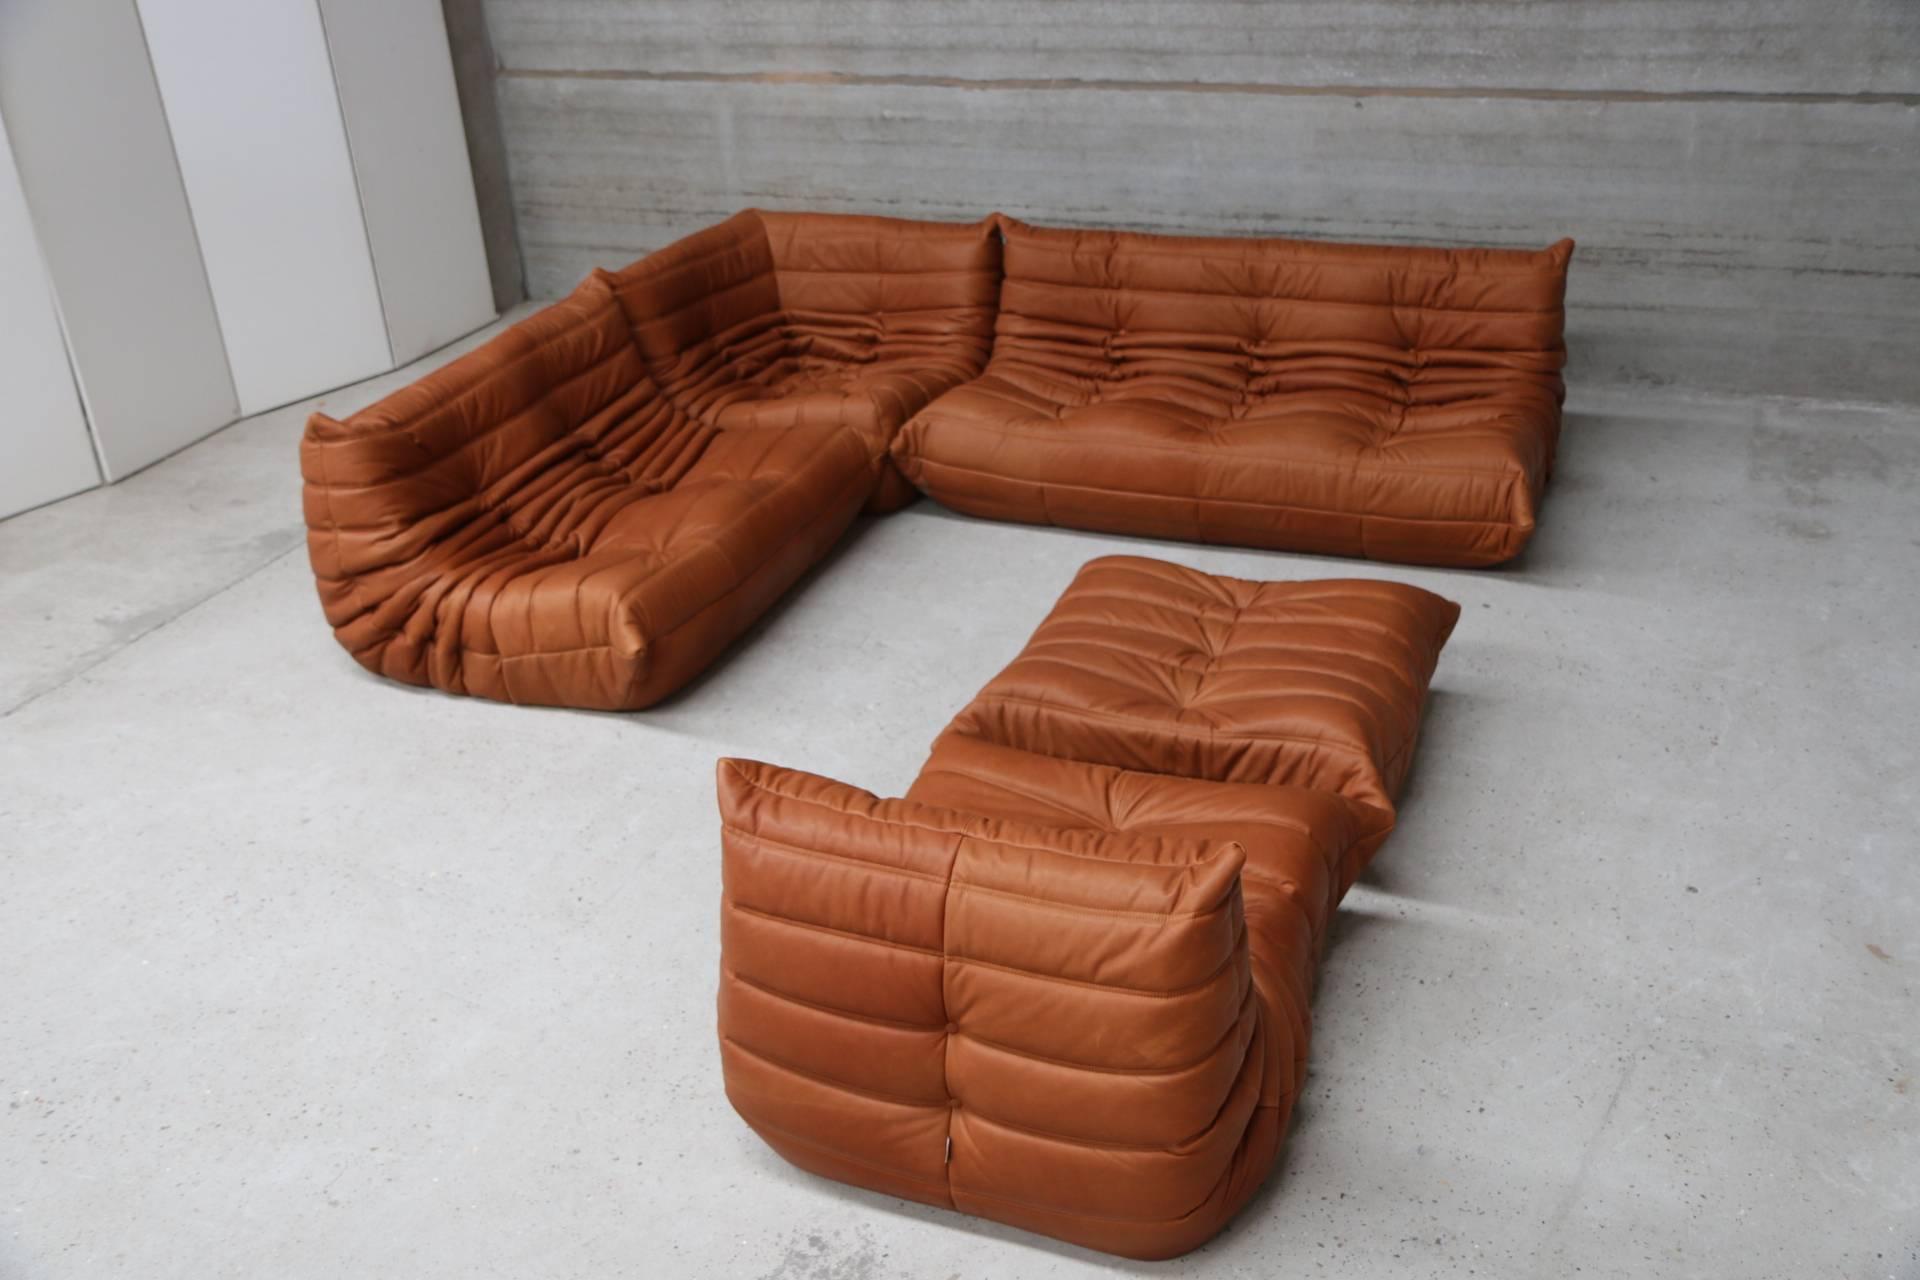 Set by Michel Ducaroy for Ligne Roset.
We specialize in reupholstering A-label sofas. This set has five pieces.
One-seat (H 700 x L 870 x D 1020) / pouf (H 300 x L 870 x D 1020) / two-seat (H 700 x L 1310 x D 1020) / three-seat (H 700 x L 1740 x D